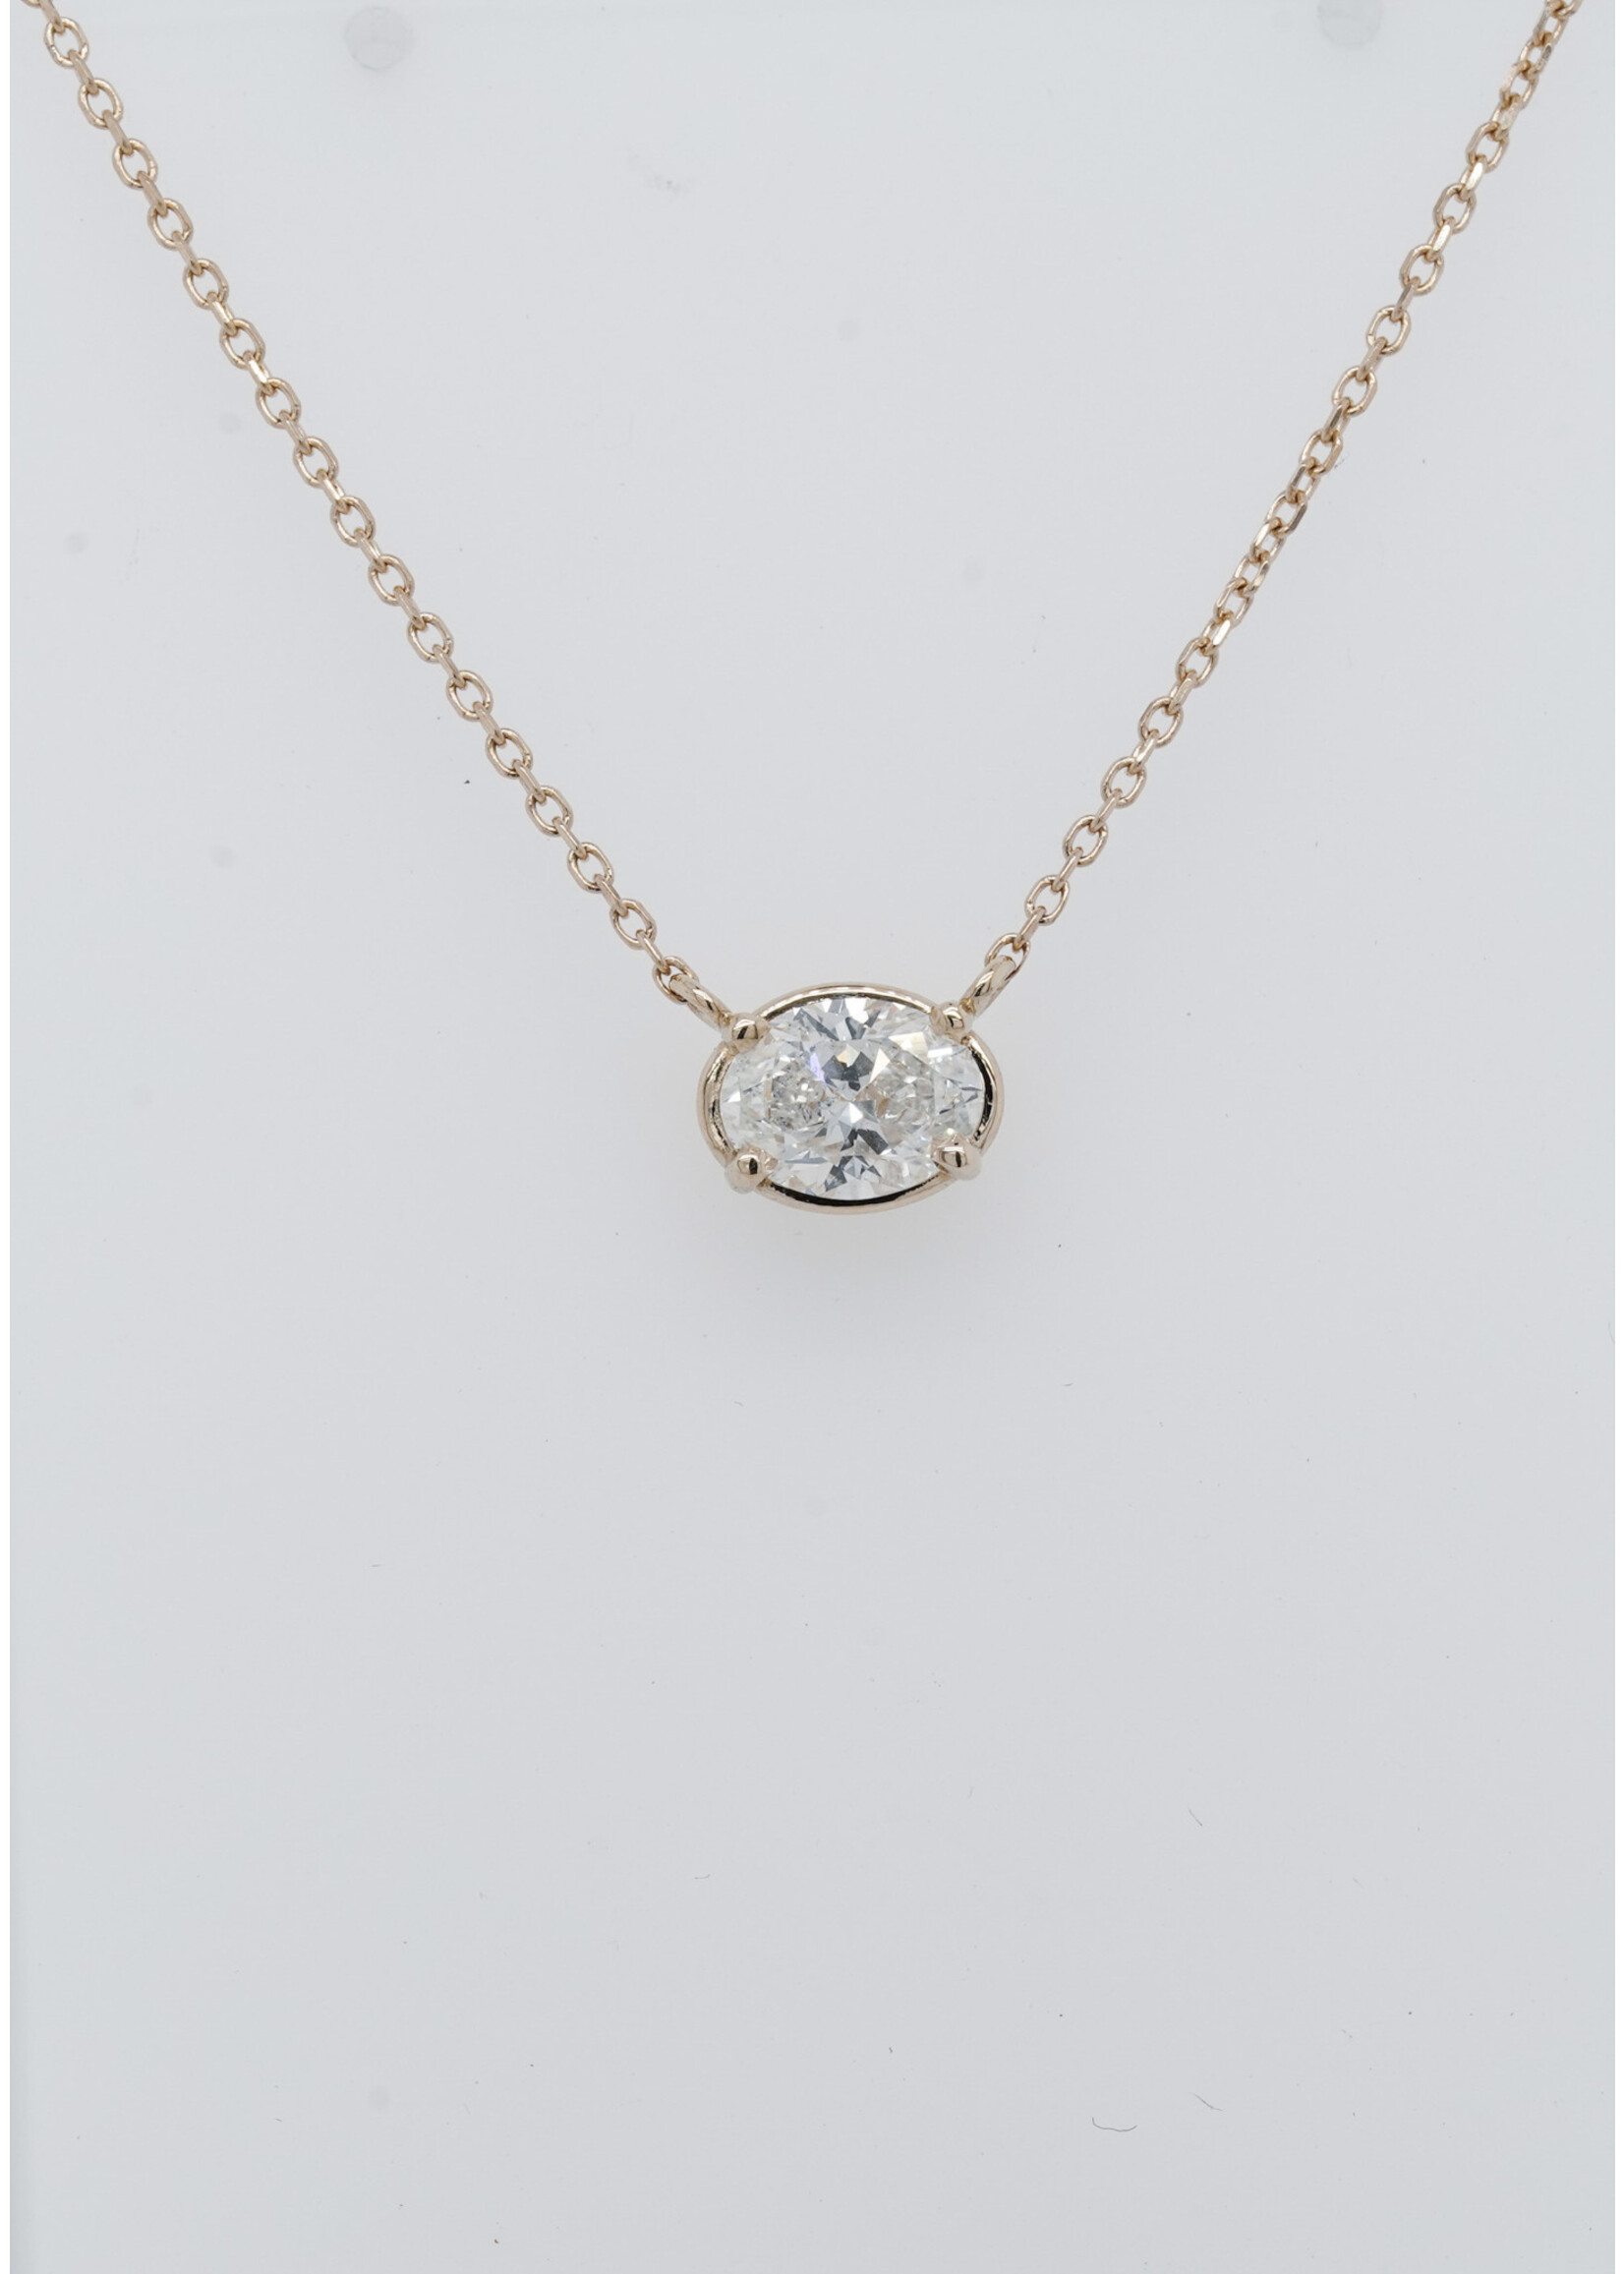 14KY 1.84g .70ct G/SI2 Oval Diamond Solitaire Necklace 16-18"